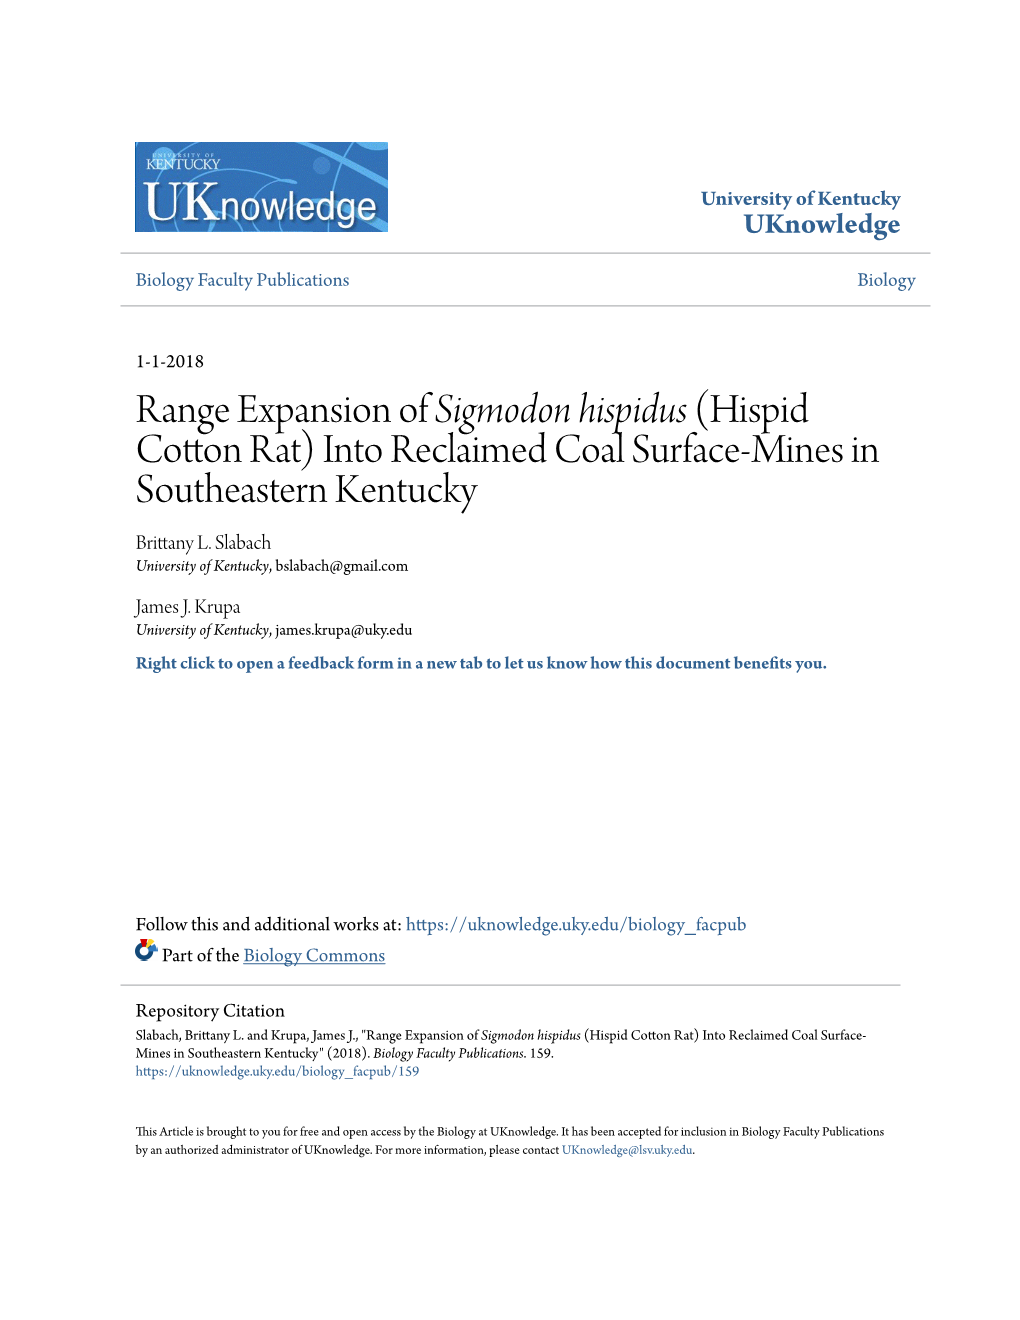 Range Expansion of Sigmodon Hispidus (Hispid Cotton Rat) Into Reclaimed Coal Surface-Mines in Southeastern Kentucky Brittany L